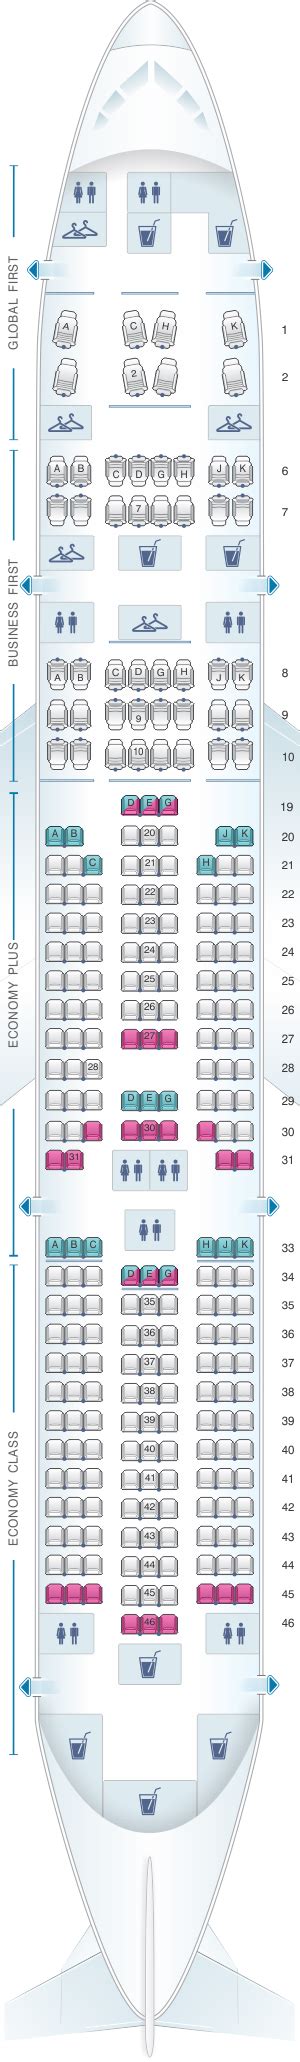 The seat map reflects the United Airlines 757-200 used on long-haul intercontinental routes. This configuration features Polaris flat bed seats, Economy Plus, and Economy seats. Polaris class on this aircraft features a standard Business Class seat which transforms into a fully flat bed. Polaris inflight service is offered.. 